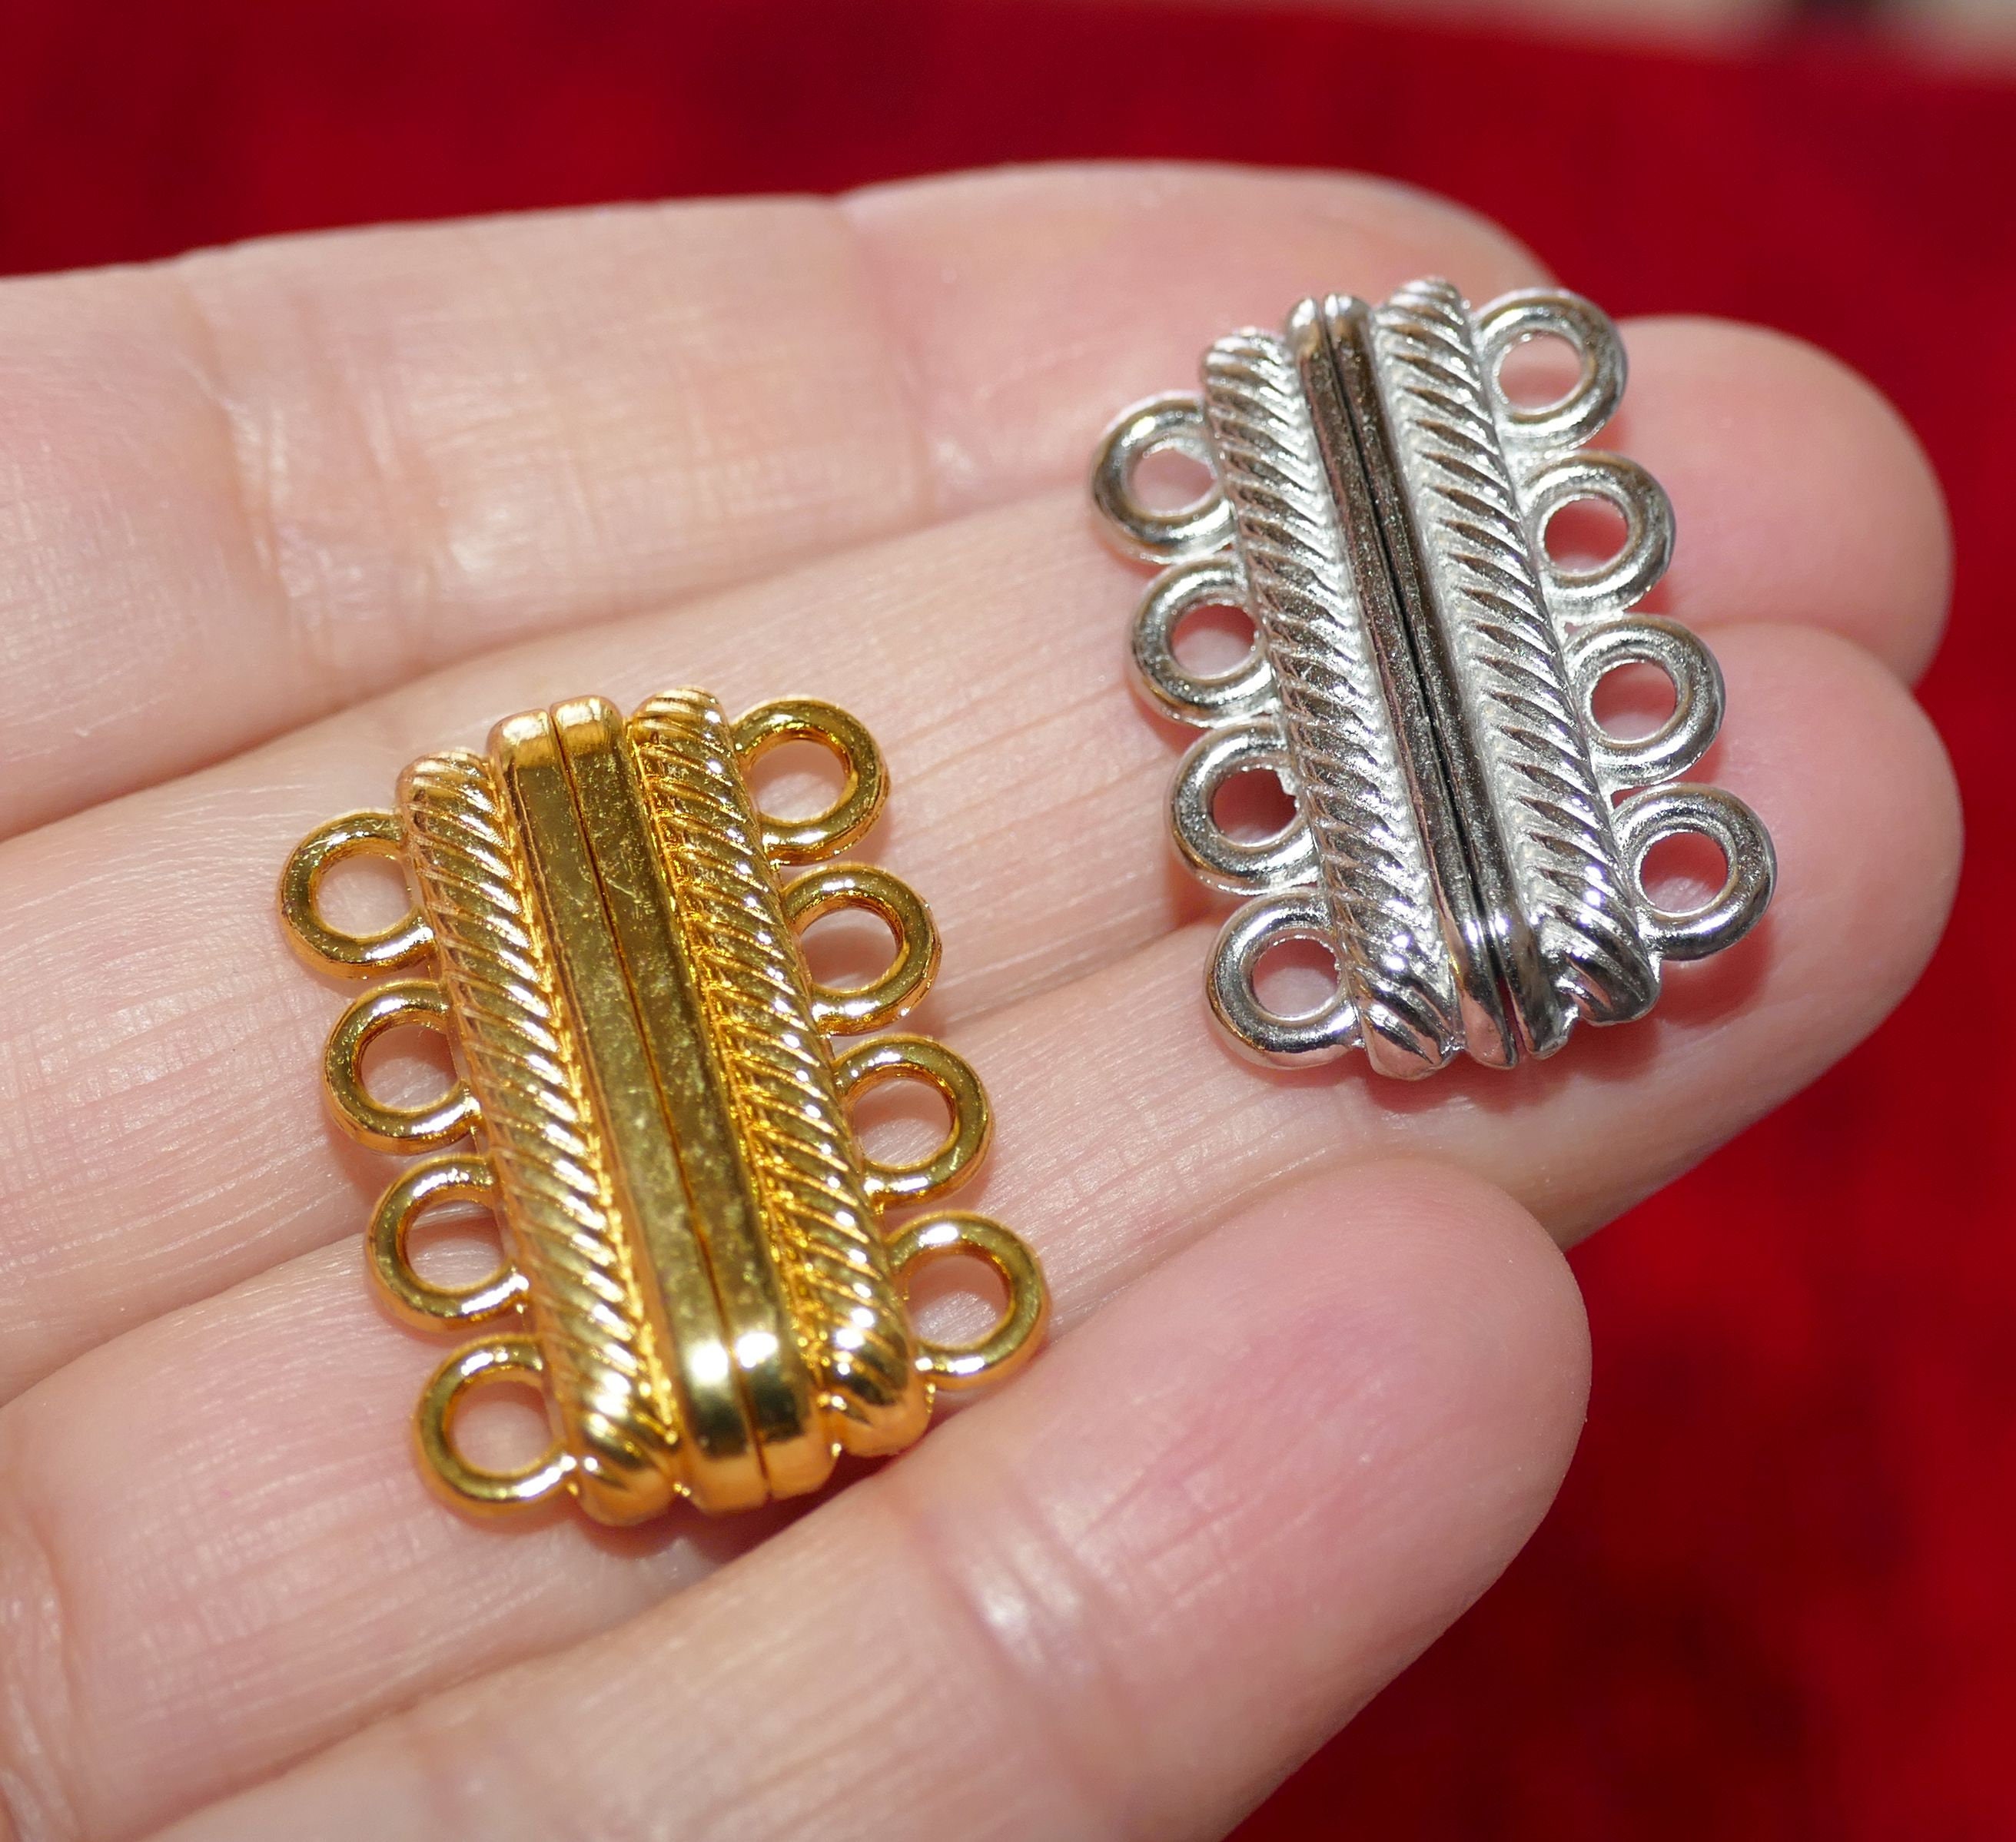 1x Magnetic Clasps, Two Row Strong Magnetic Clasps, 2 Strand